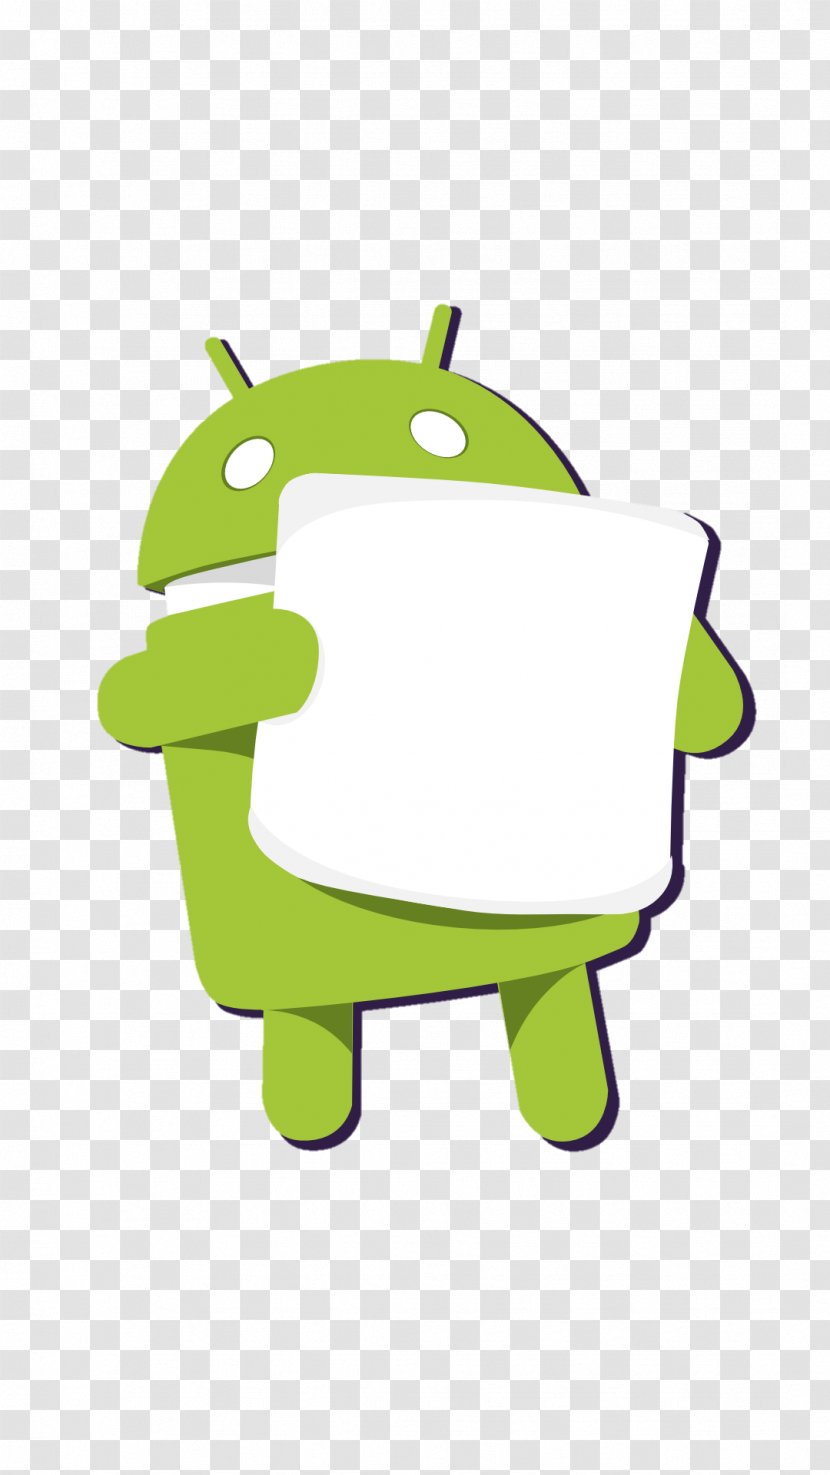 Samsung Galaxy S III Android Marshmallow Firmware - Plant Transparent PNG